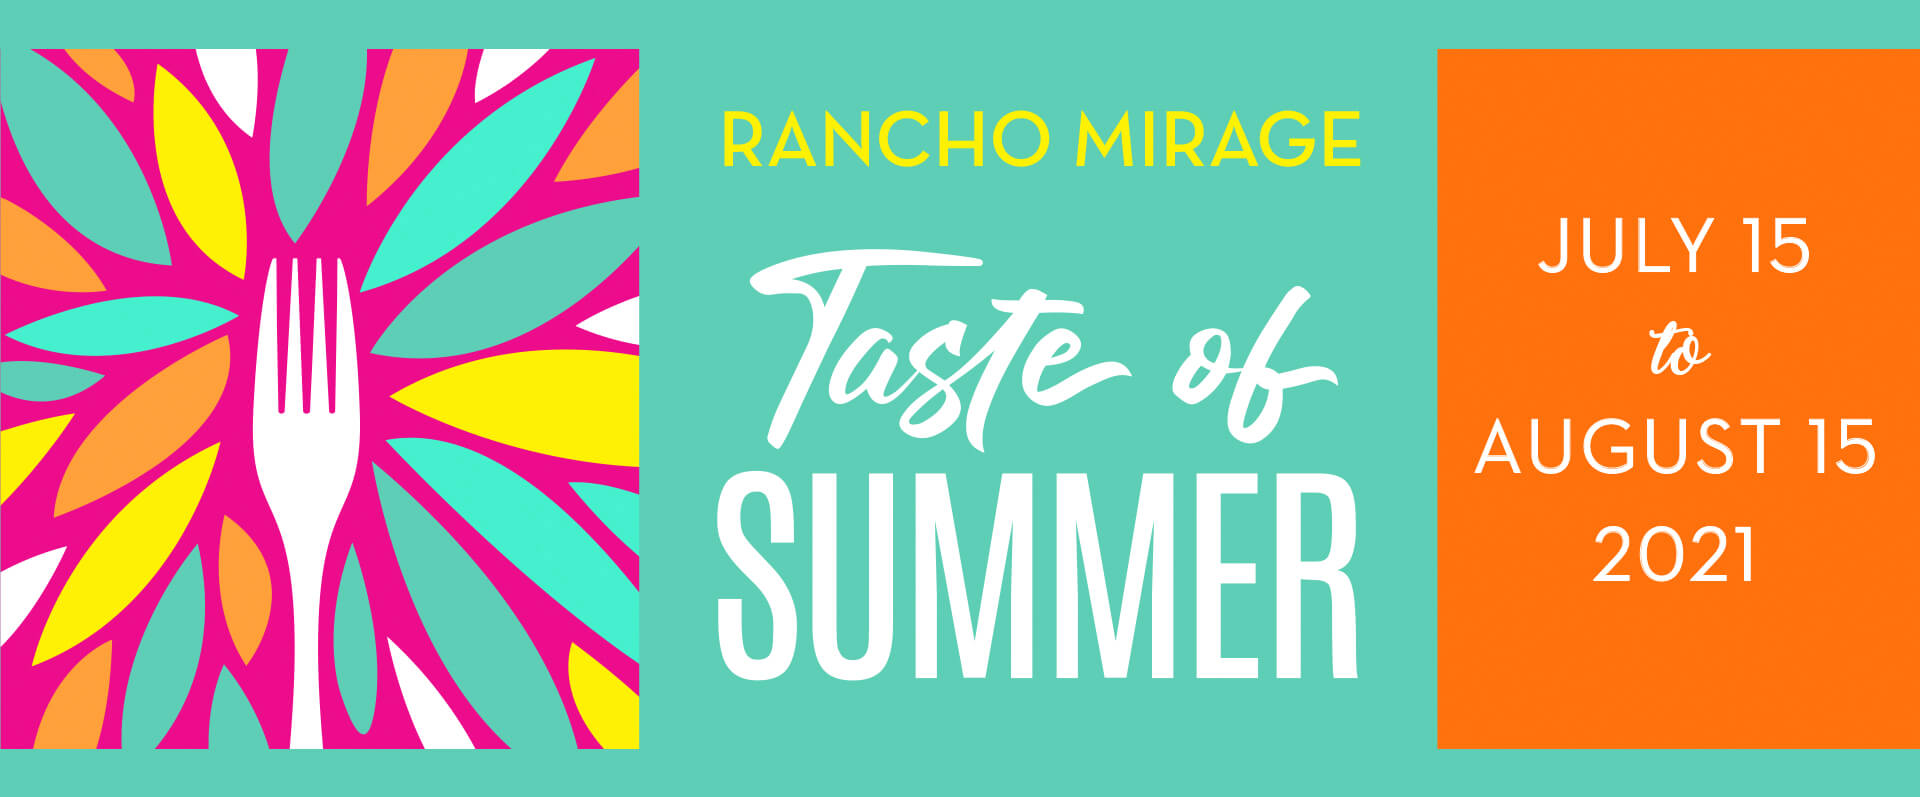 Home Rancho Mirage Chamber Of Commerce